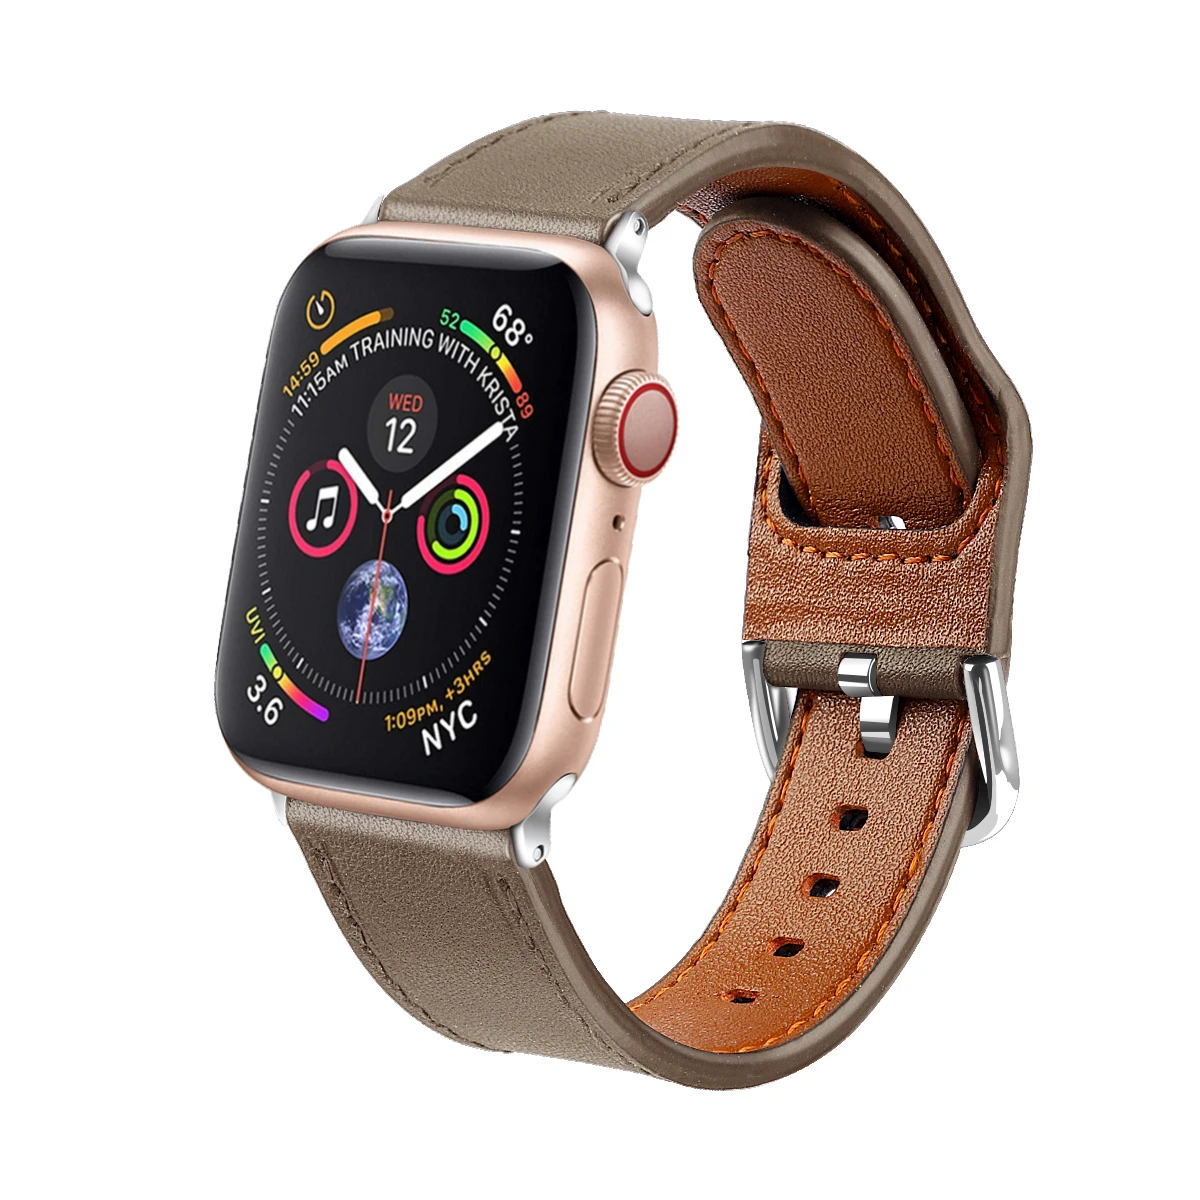 

Premium Leather Strap for Apple Watch Band Series 6 5 4 3 2 Bracelet Correa for iWatch 38-42mm Band Case Myl-bd15